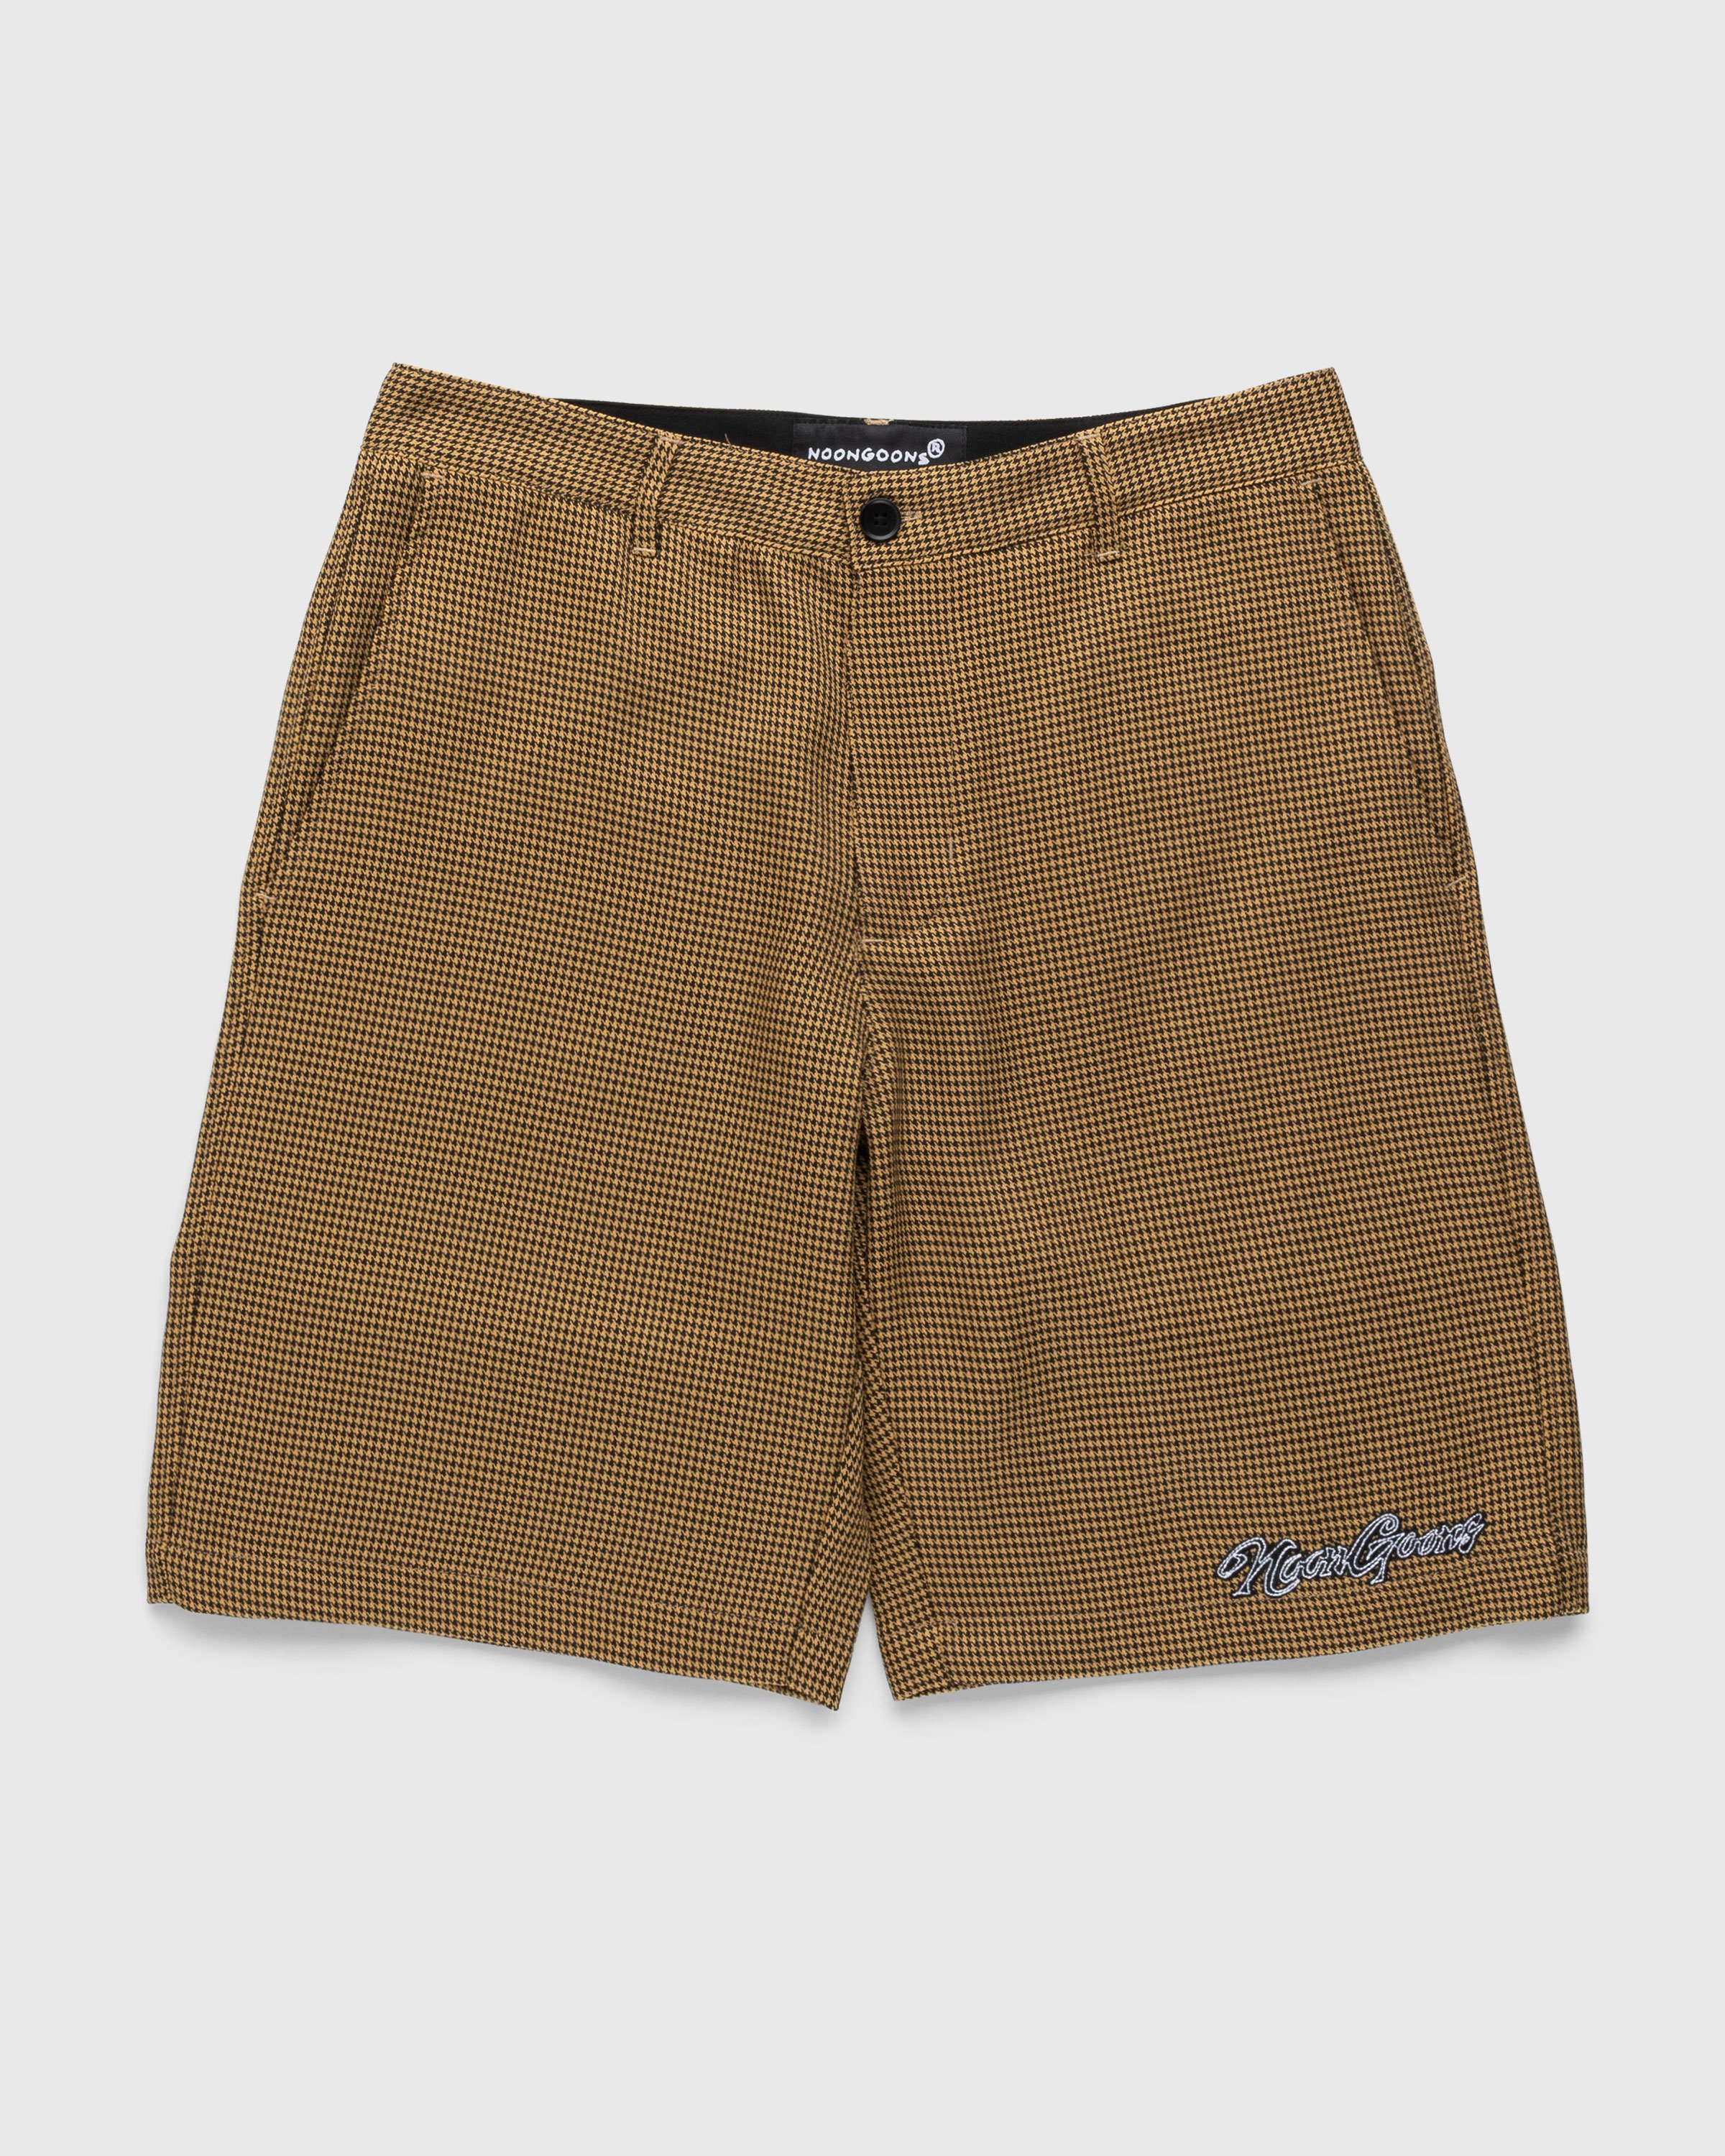 Noon Goons - Banned Houndstooth Shorts Brown - Clothing - Brown - Image 1